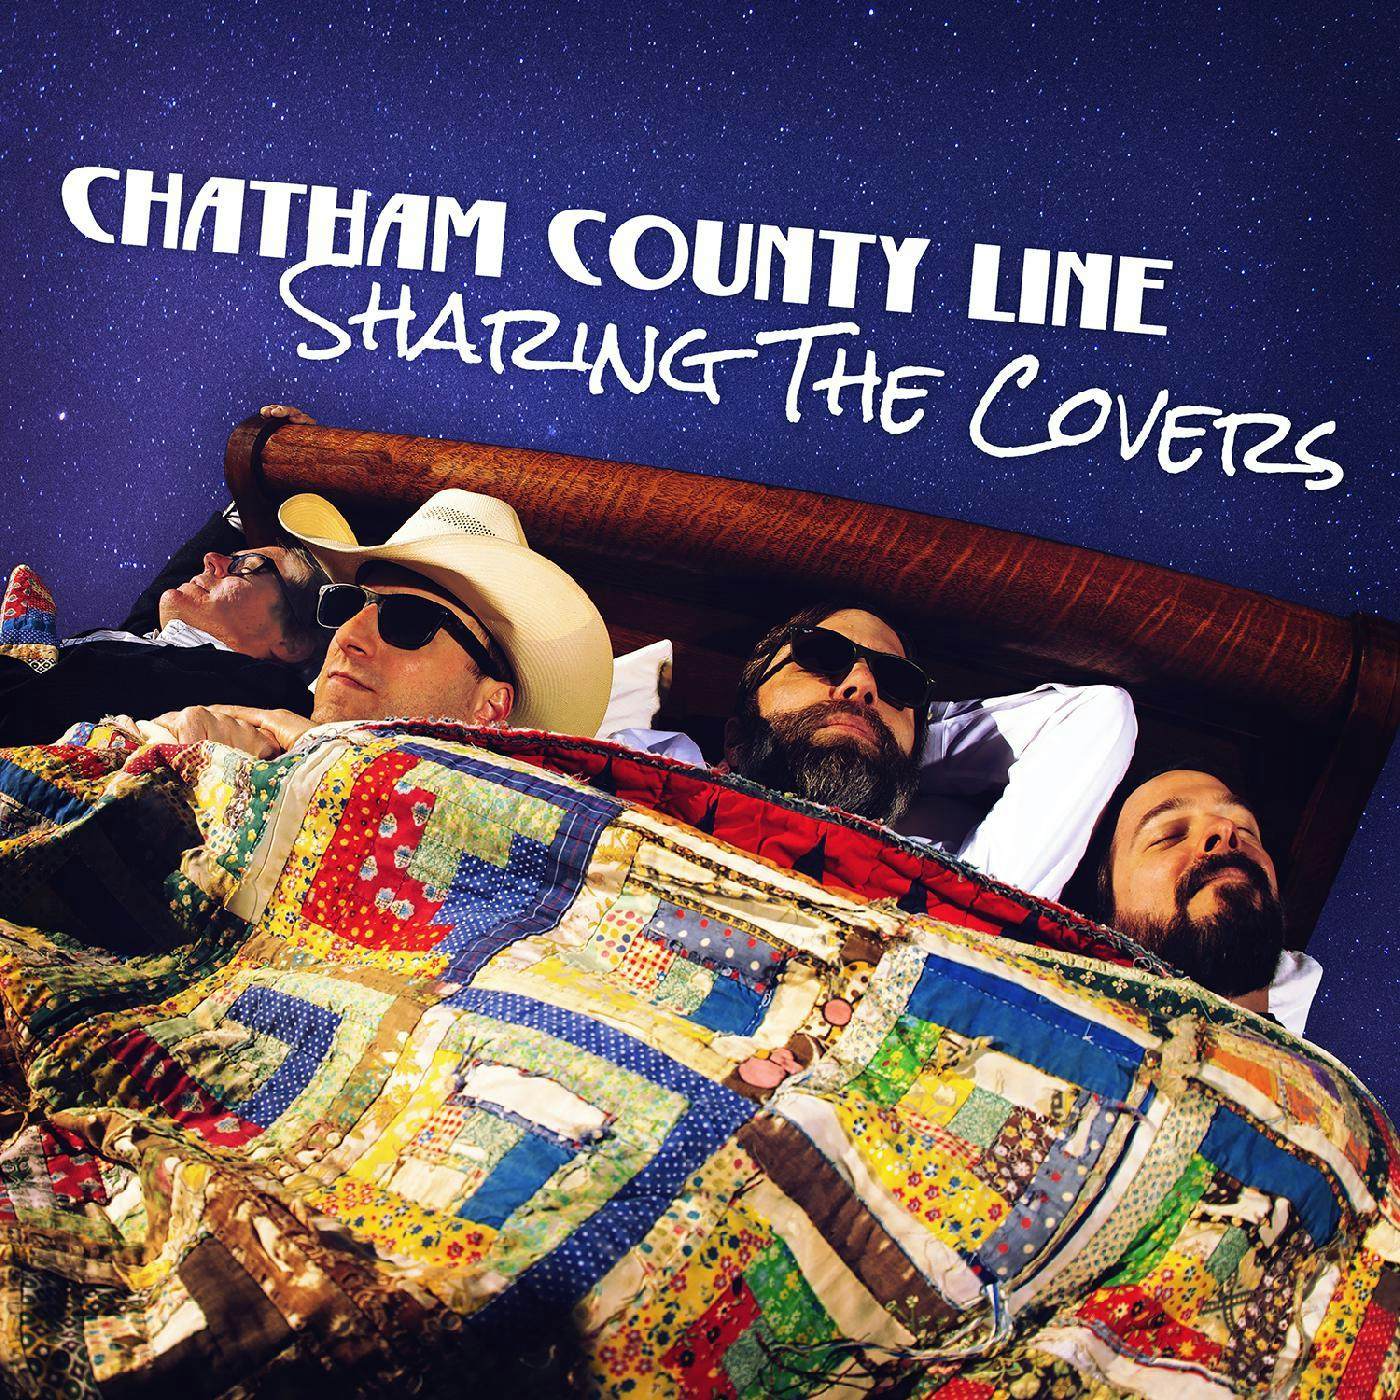 Chatham County Line Sharing The Covers Vinyl Record